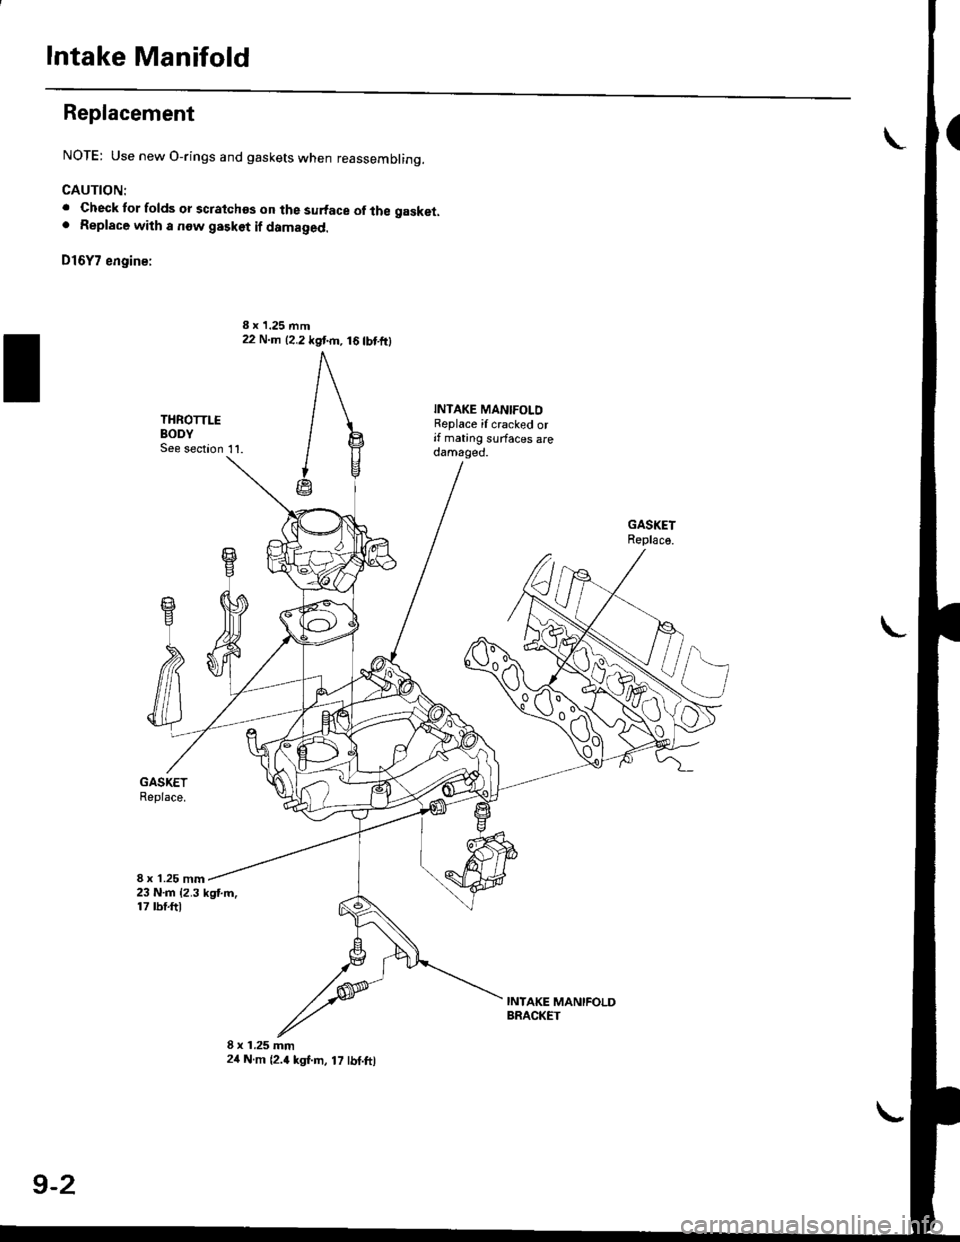 HONDA CIVIC 1999 6.G Workshop Manual Intake Manifold
Replacement
NOTE: Use new O-rings and gaskets when reassemblinq.
CAUTION:
. Check tor folds or scratchos on the surface of tbe gasket.. Replace with a now gasket if damaged.
D16Y7 engi